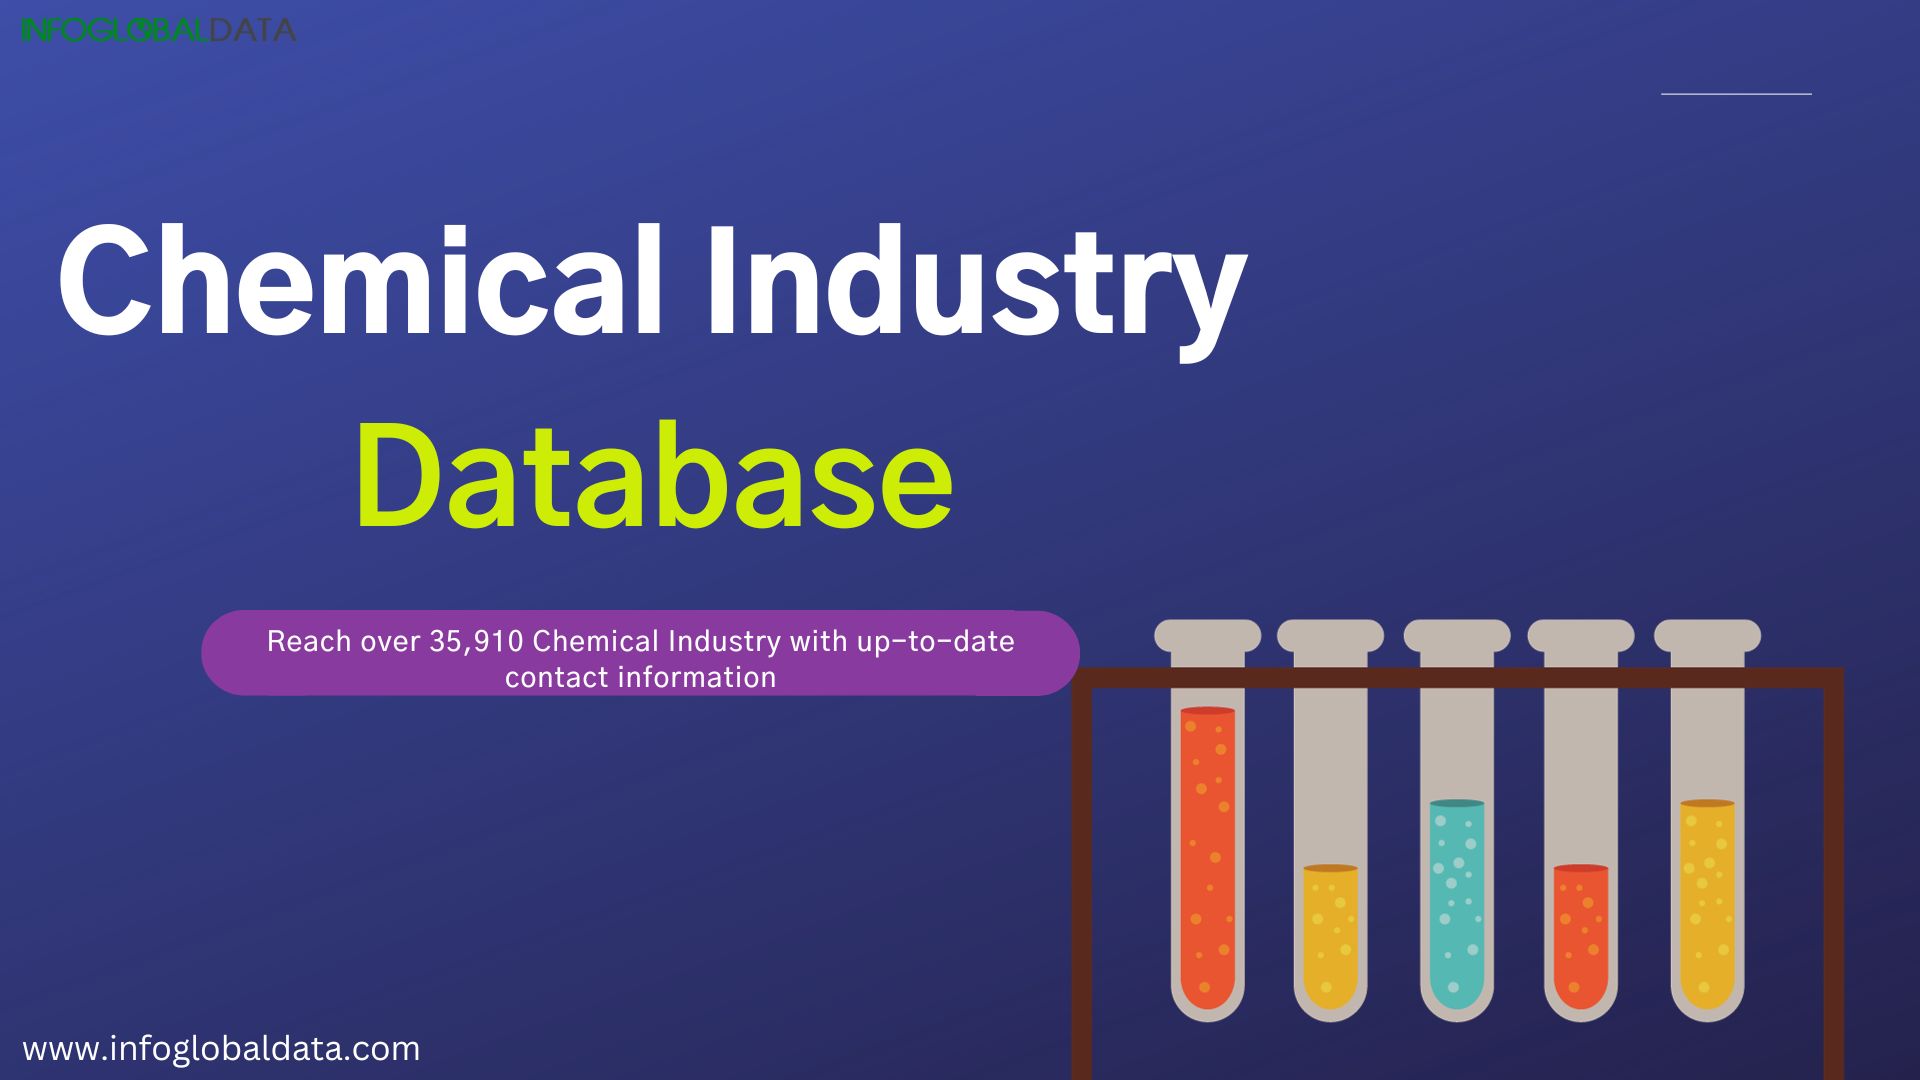 Ensure Data Security and Privacy in a Chemical Industry Database